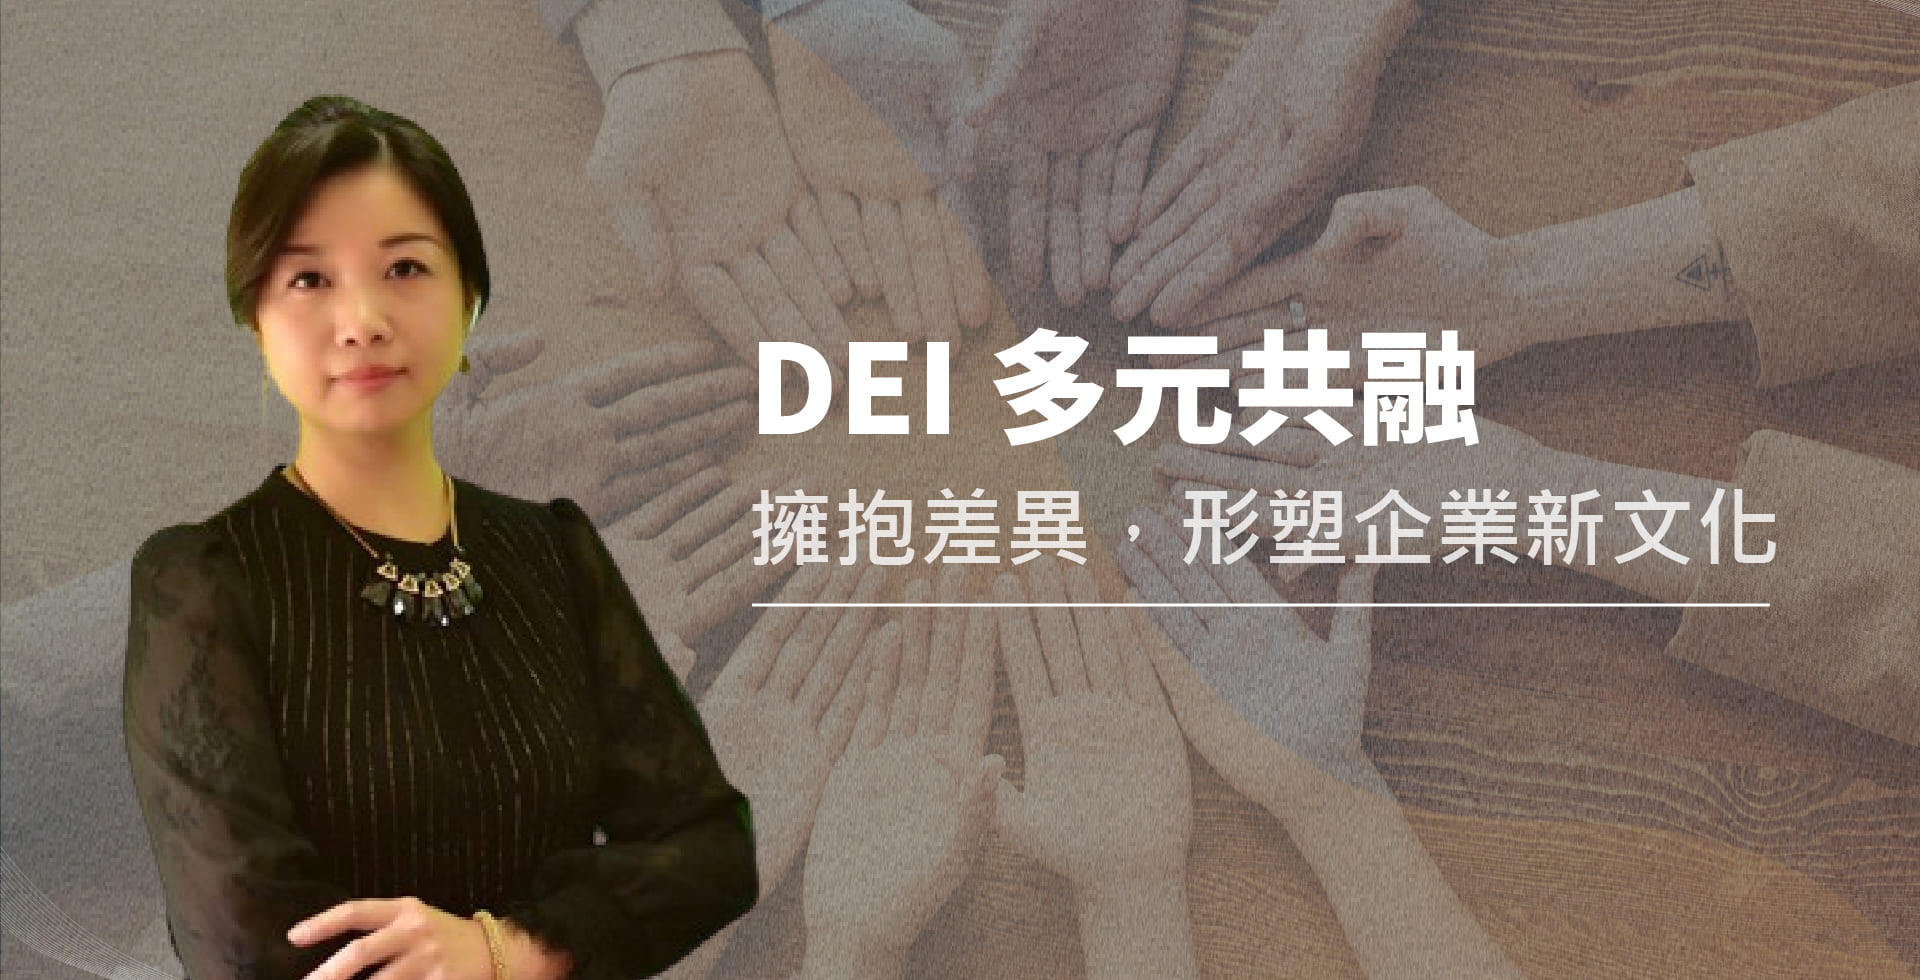 read more about the article dei 多元共融：擁抱差異，形塑企業新文化